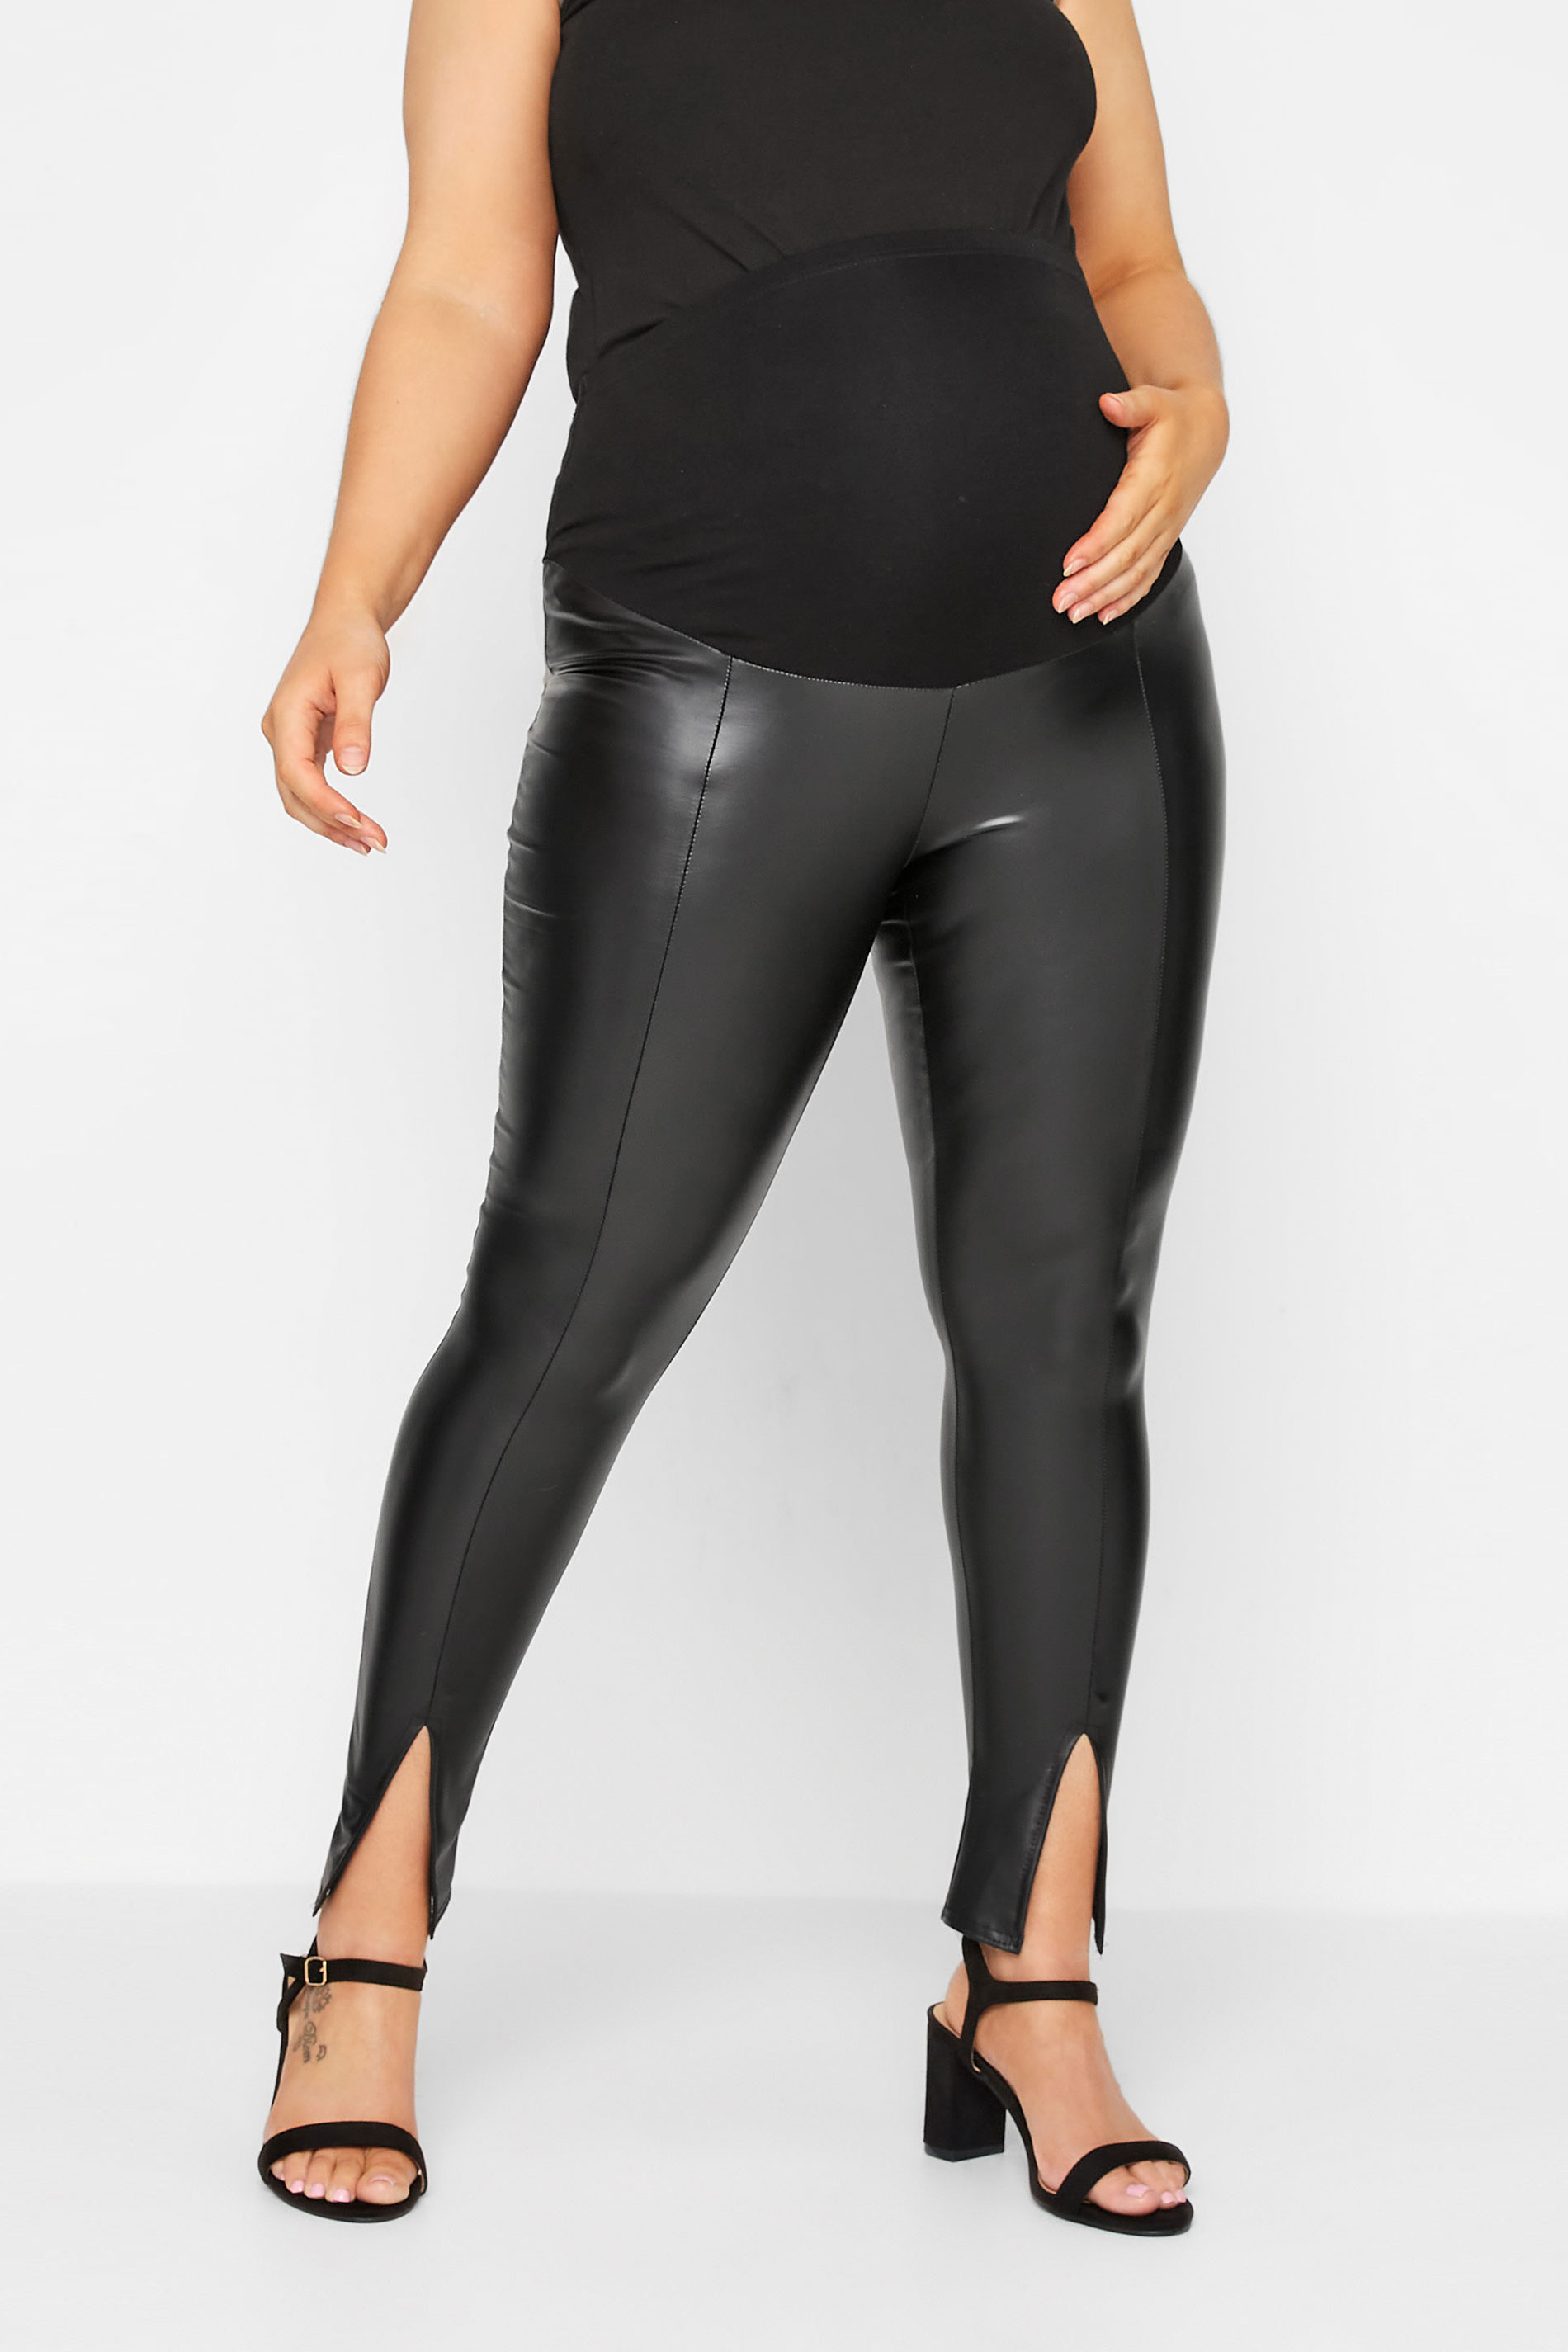 Yours Curve Women's Plus Size Maternity Leather Look Front Split